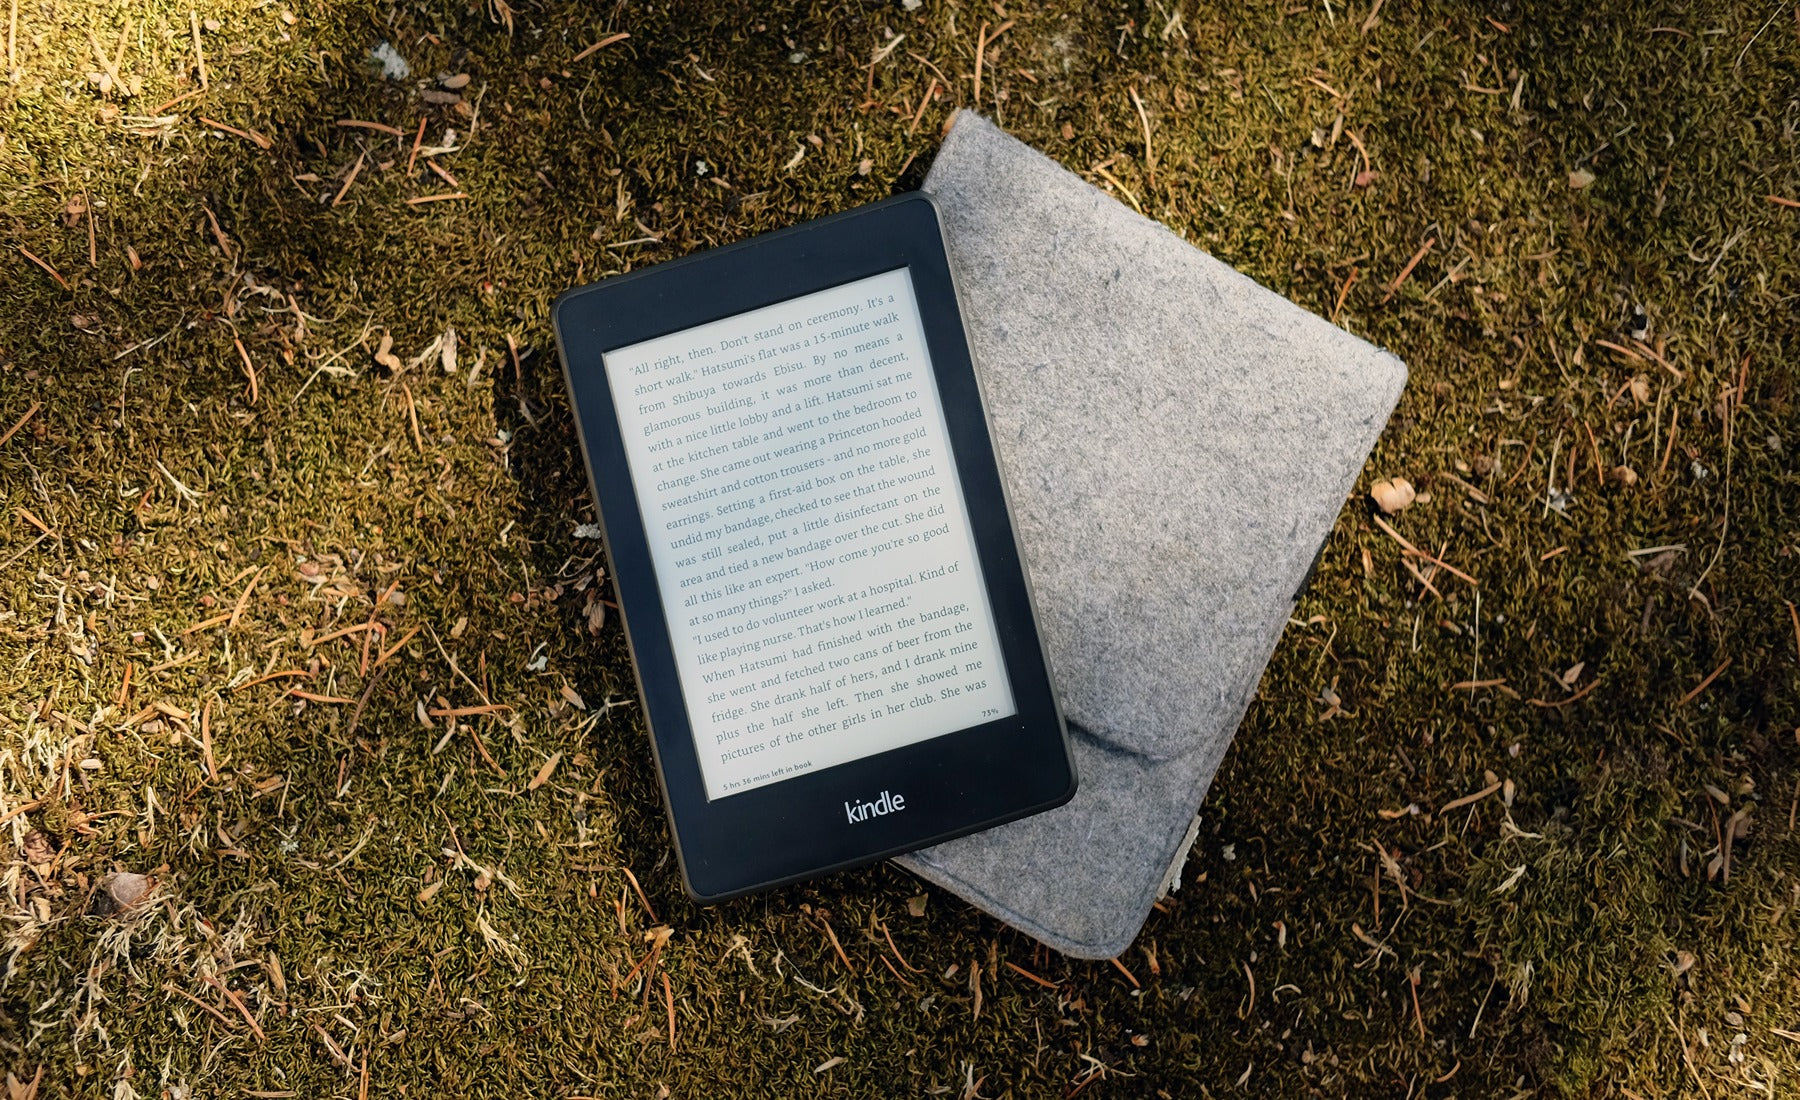 Best Kindle to Buy in 2020 -  Kindle Reviews